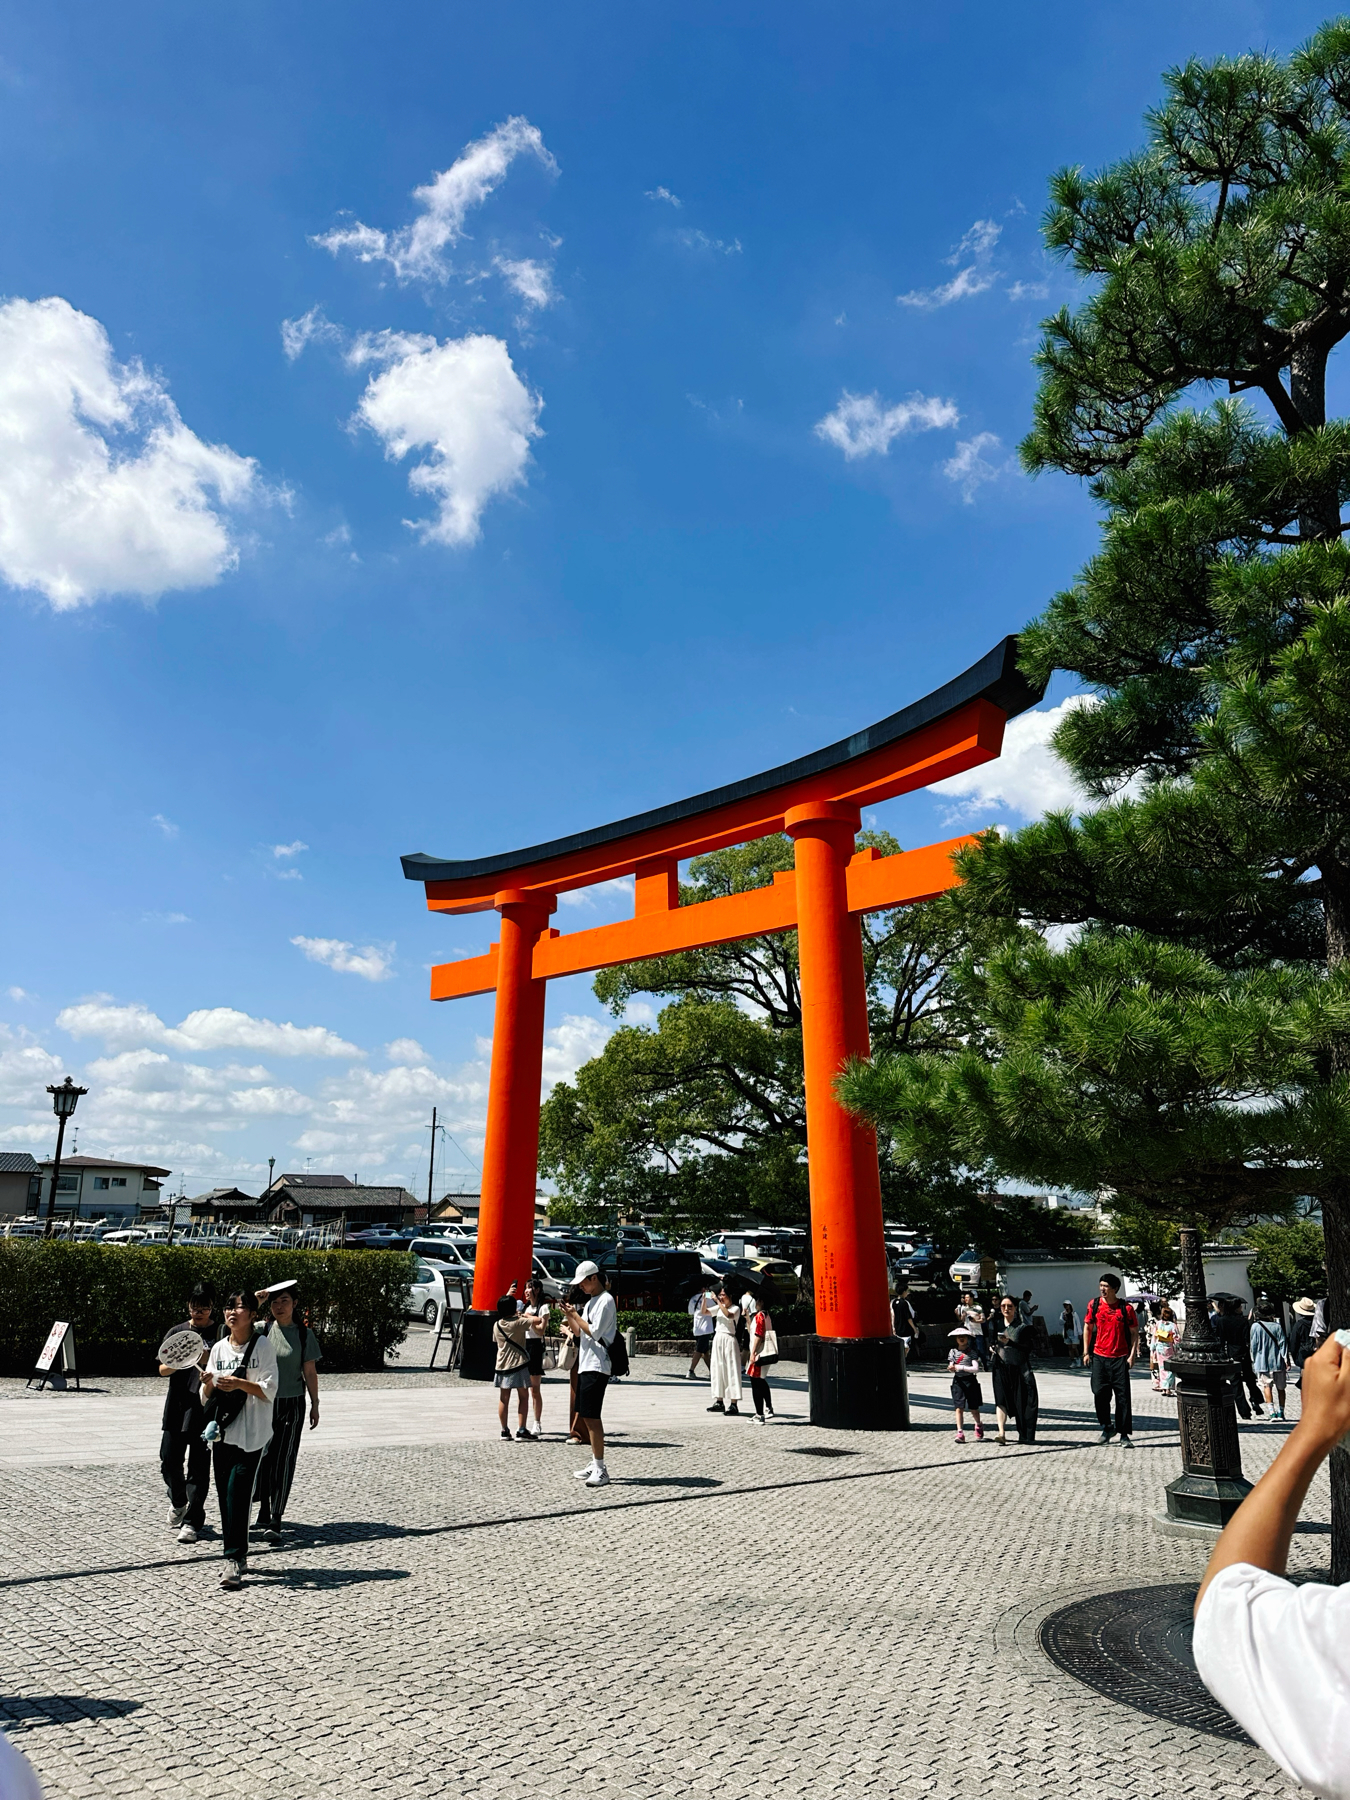 Torii gate at a Japanese shrine with visitors walking around on a sunny day, with clear blue sky and fluffy clouds overhead.